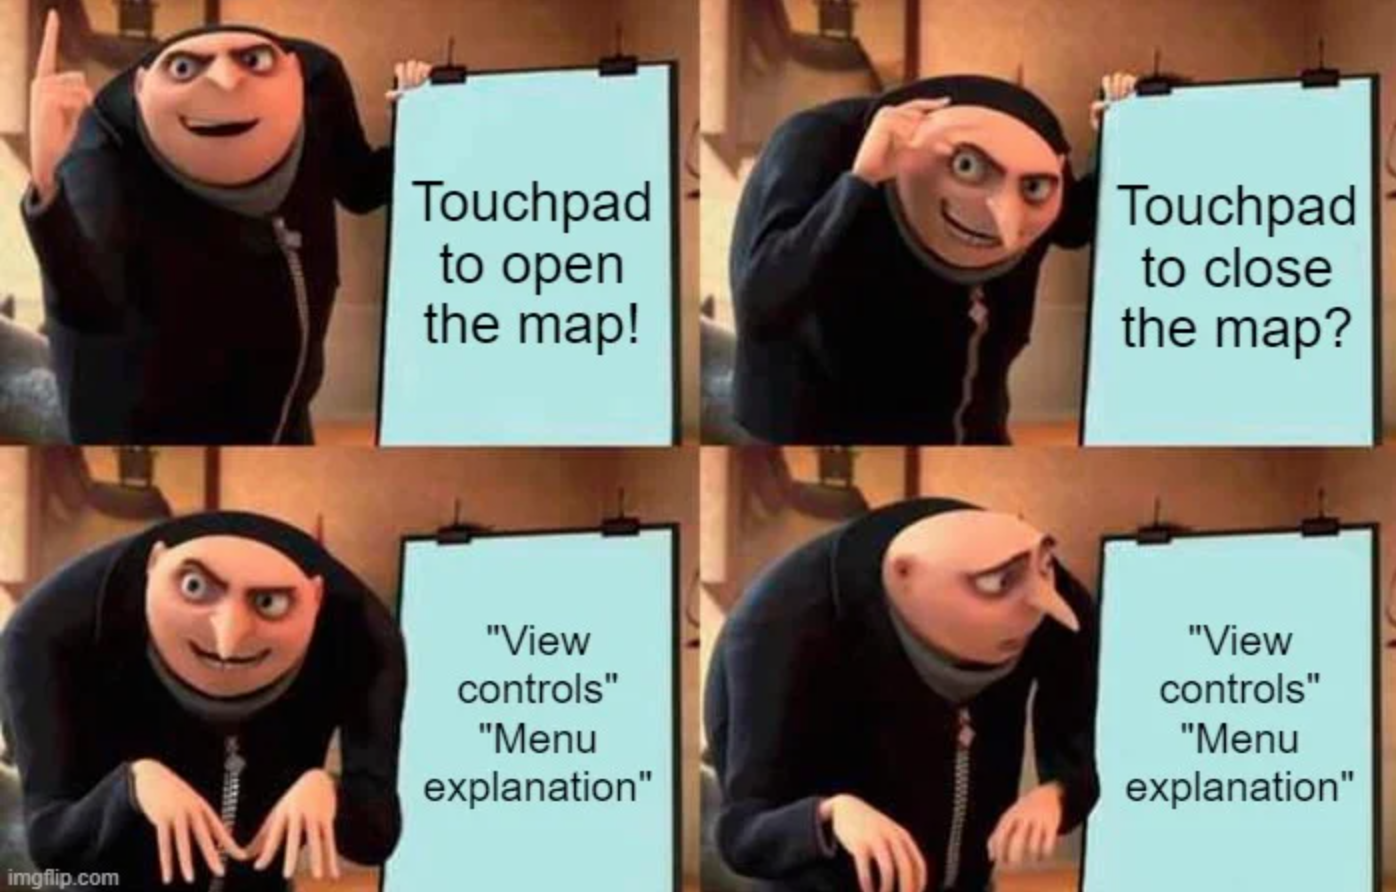 elden ring memes - gru on the toilet - Touchpad to open the map! Touchpad to close the map? "View controls" "Menu explanation" "View controls" "Menu explanation" imgflip.com